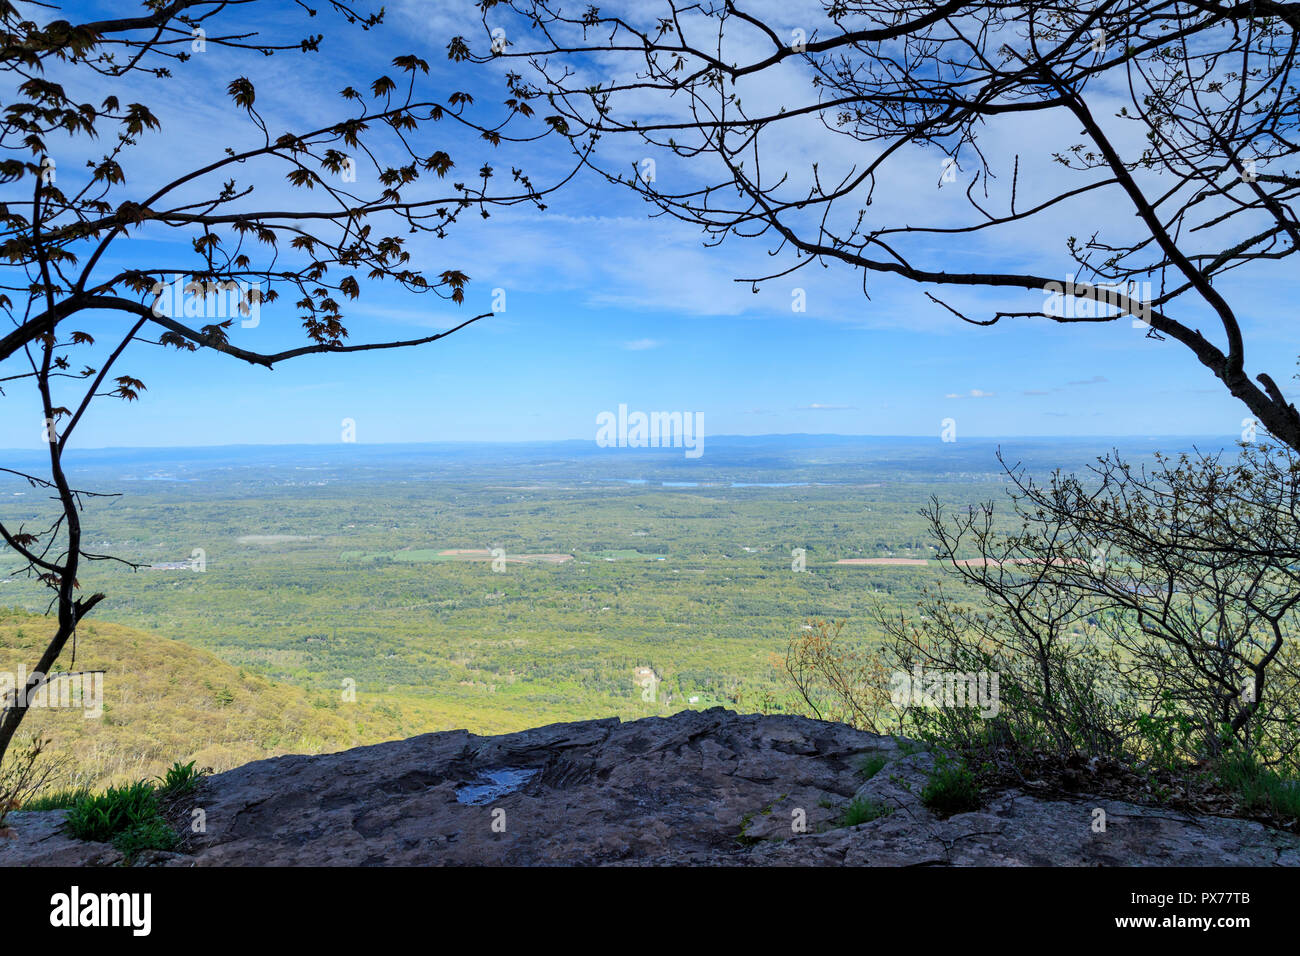 Site of Historic Catskill Mountain House with View over New York Landscape, near Tannersville, New York, USA Stock Photo